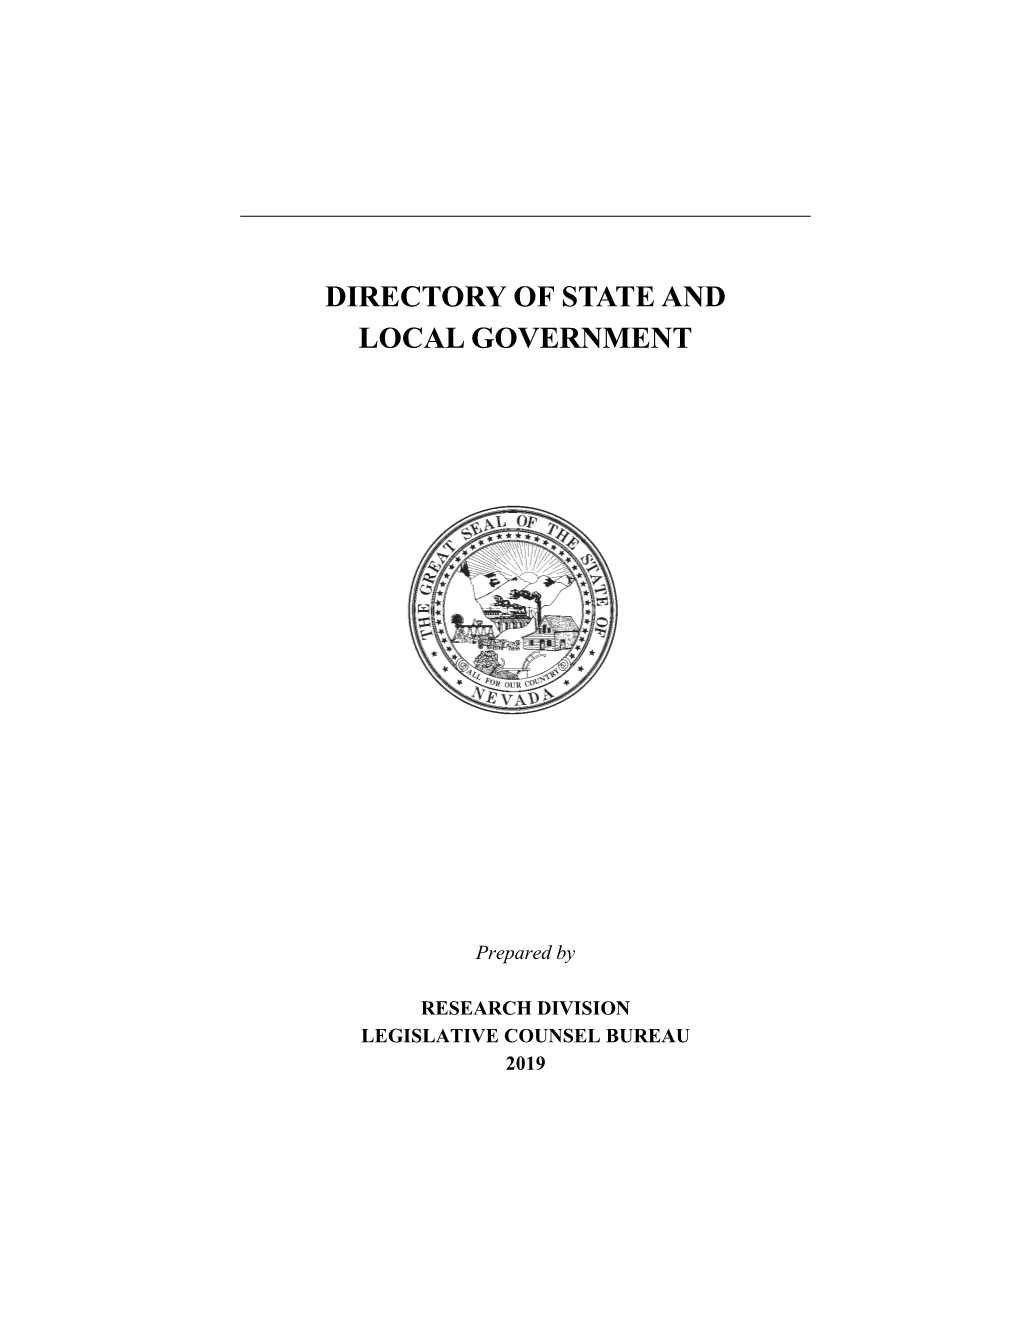 Nevada Directory of State and Local Government